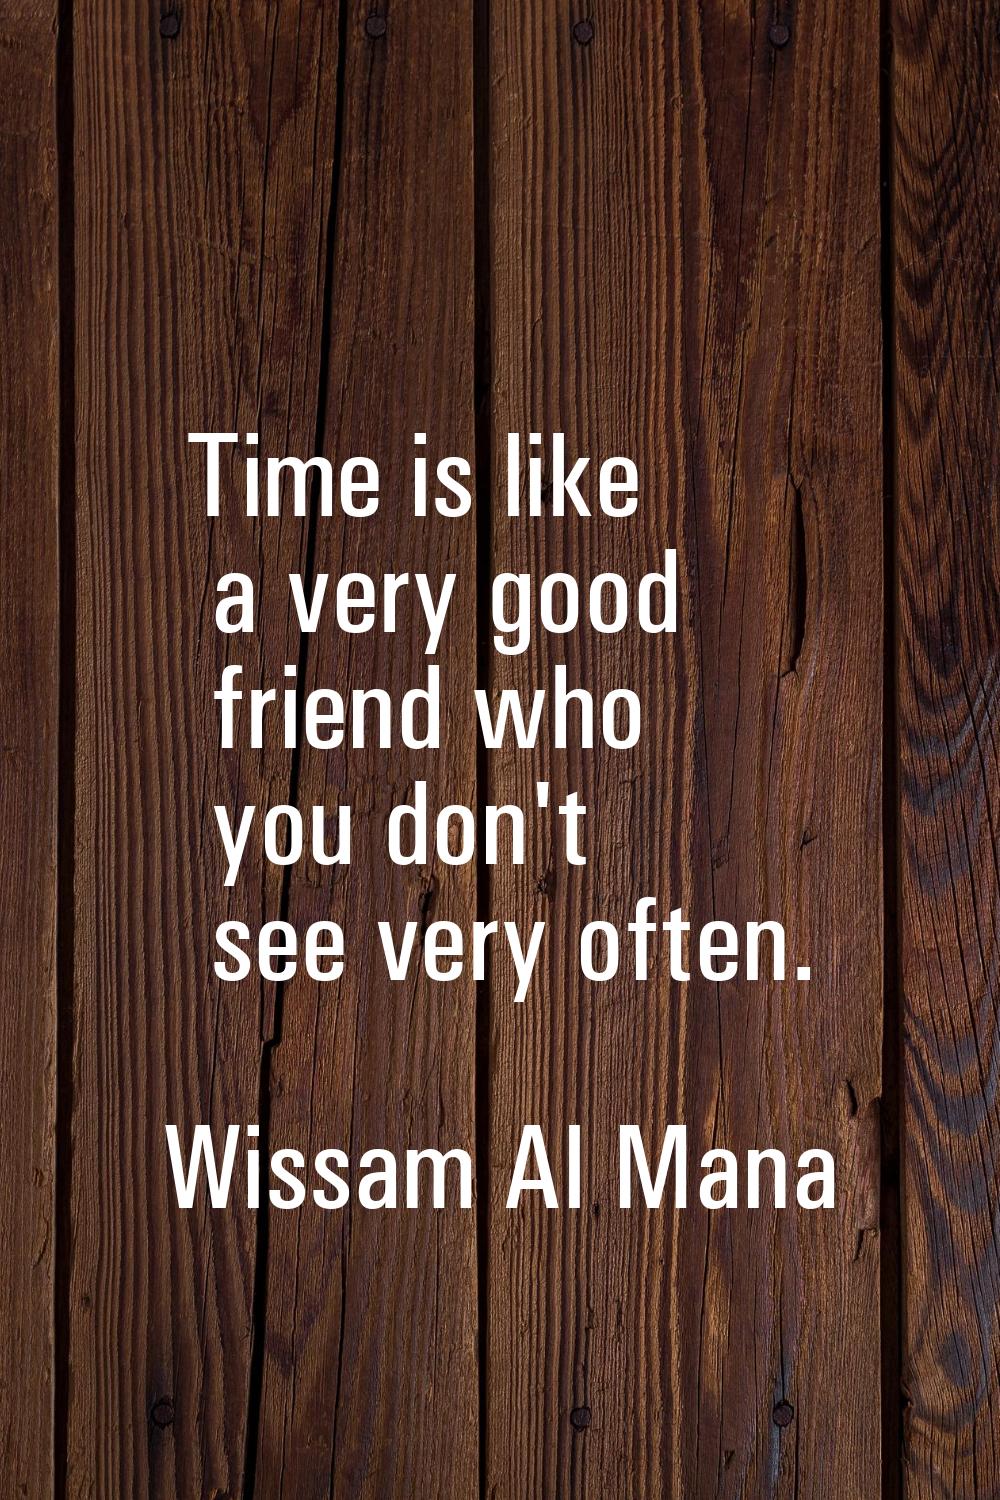 Time is like a very good friend who you don't see very often.